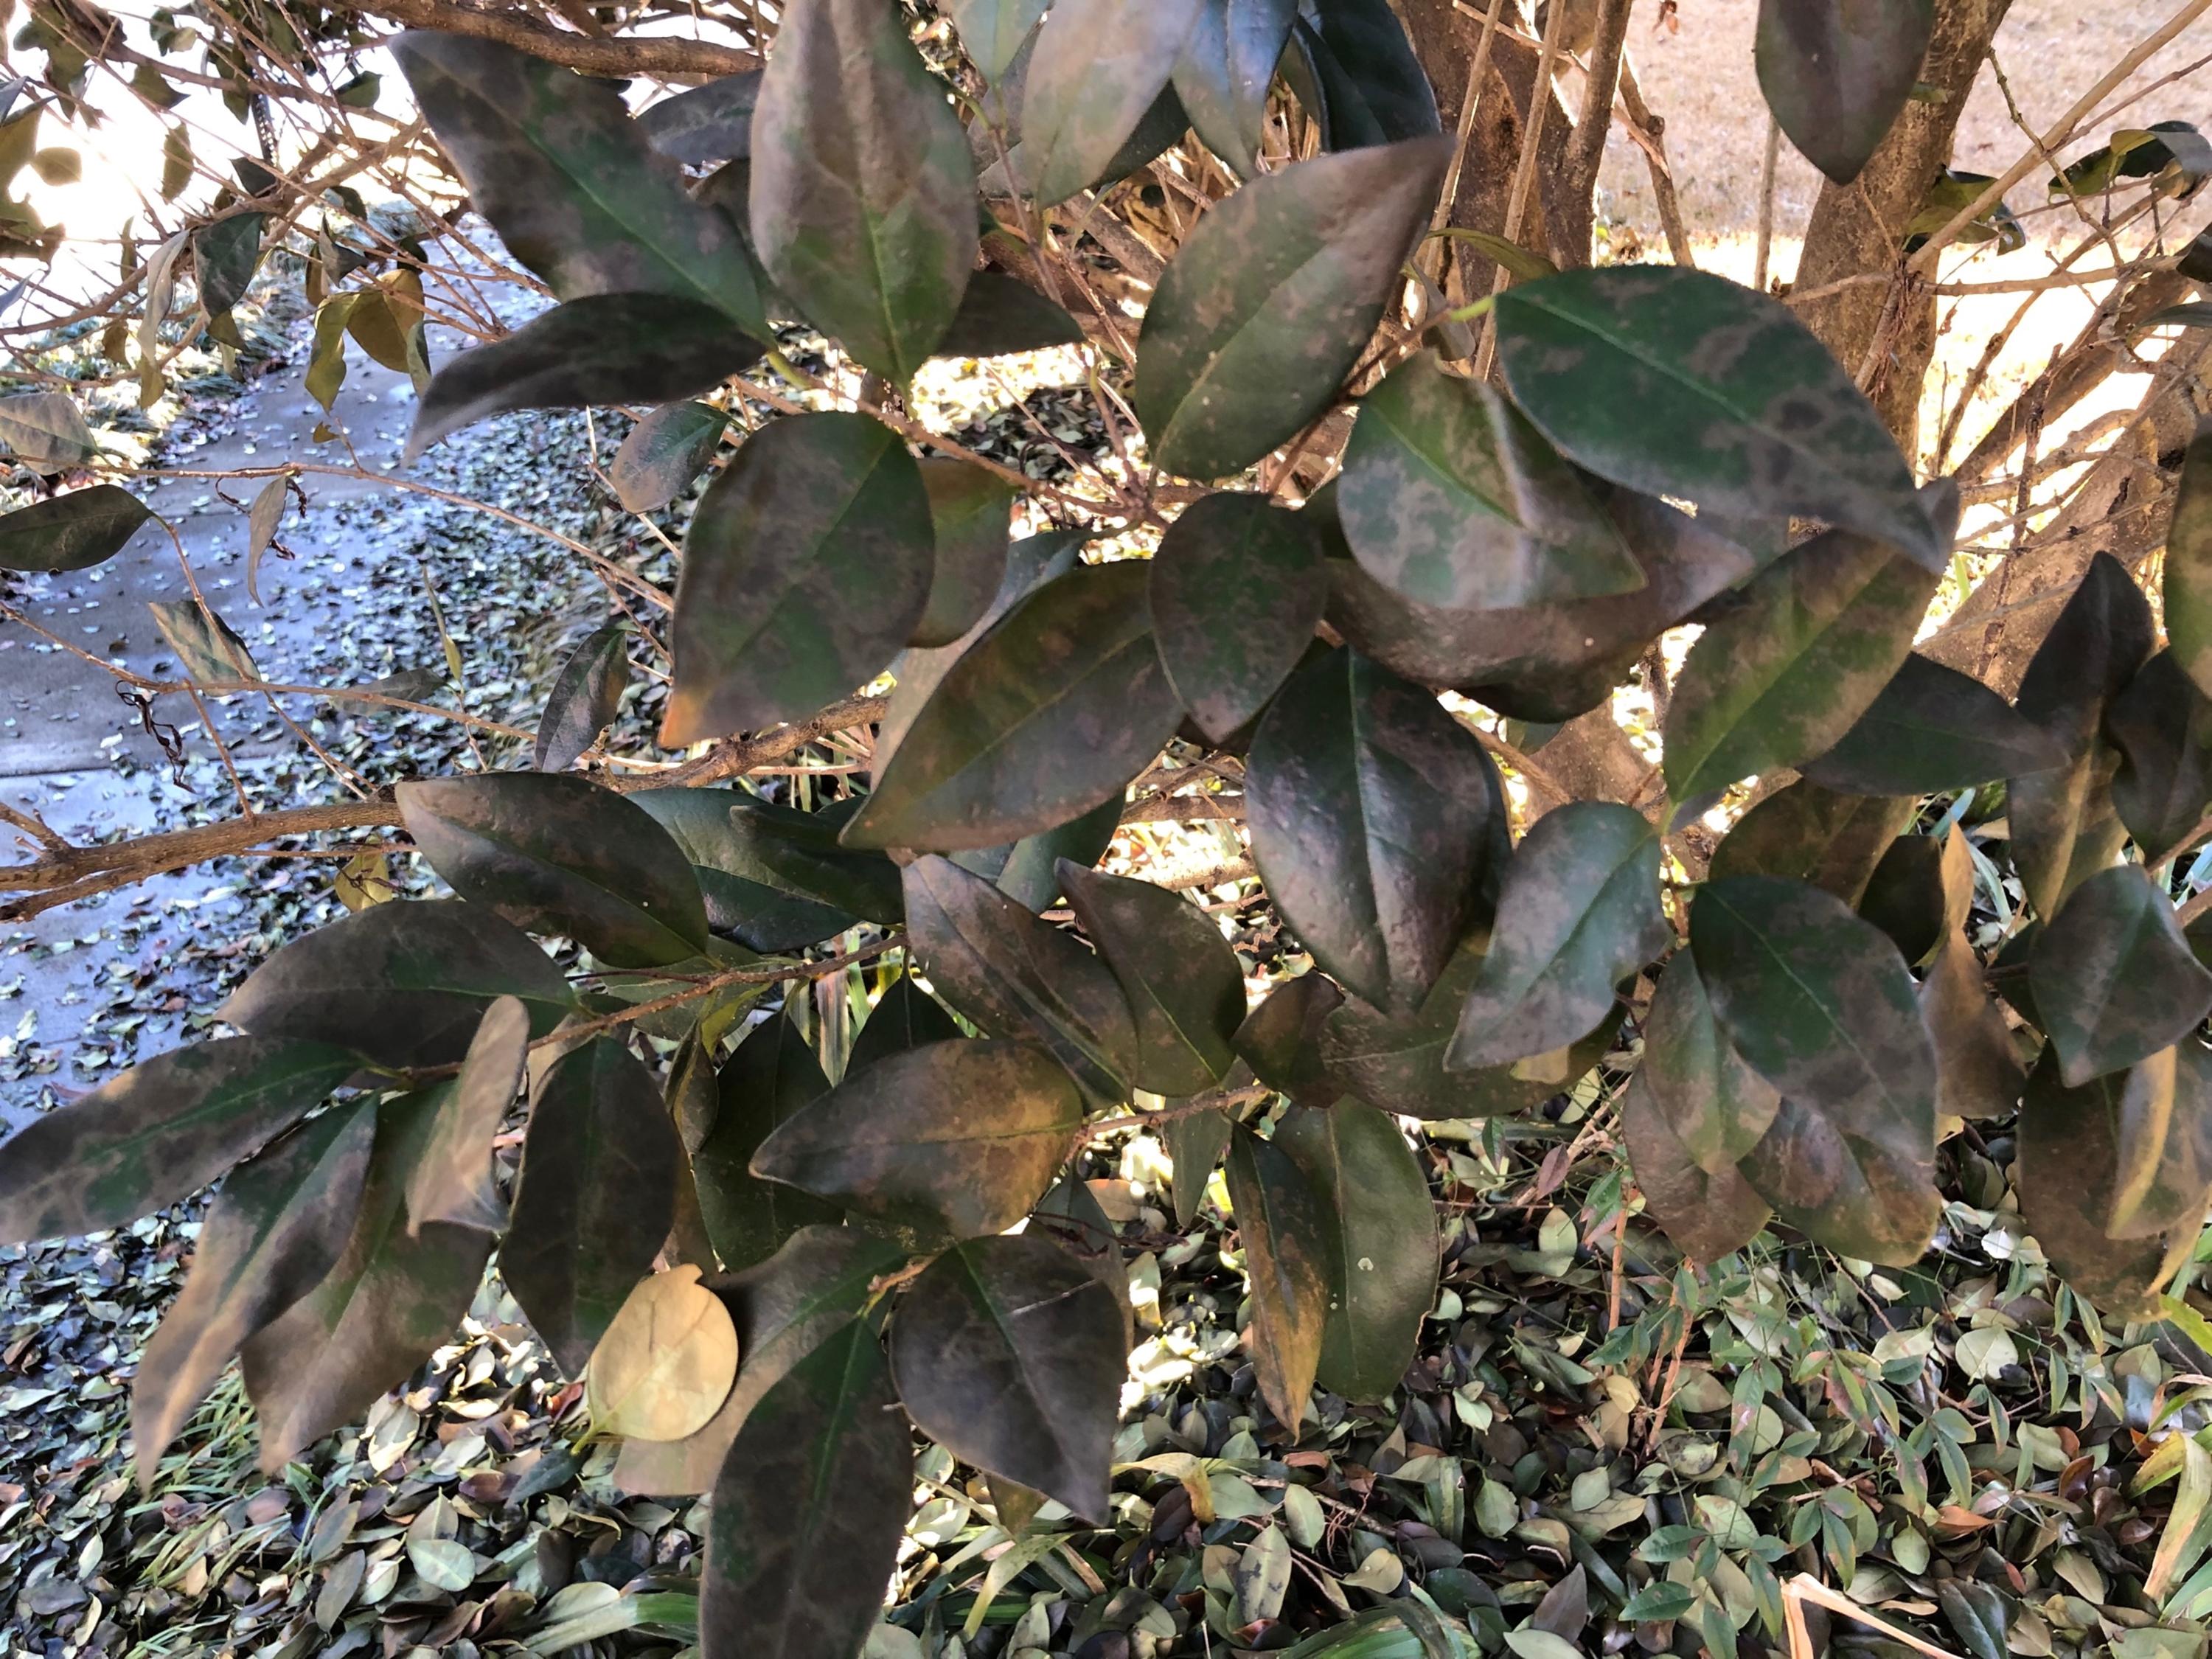 The leaves of this ligustrum hedge were damaged by frost, and most eventually fell.